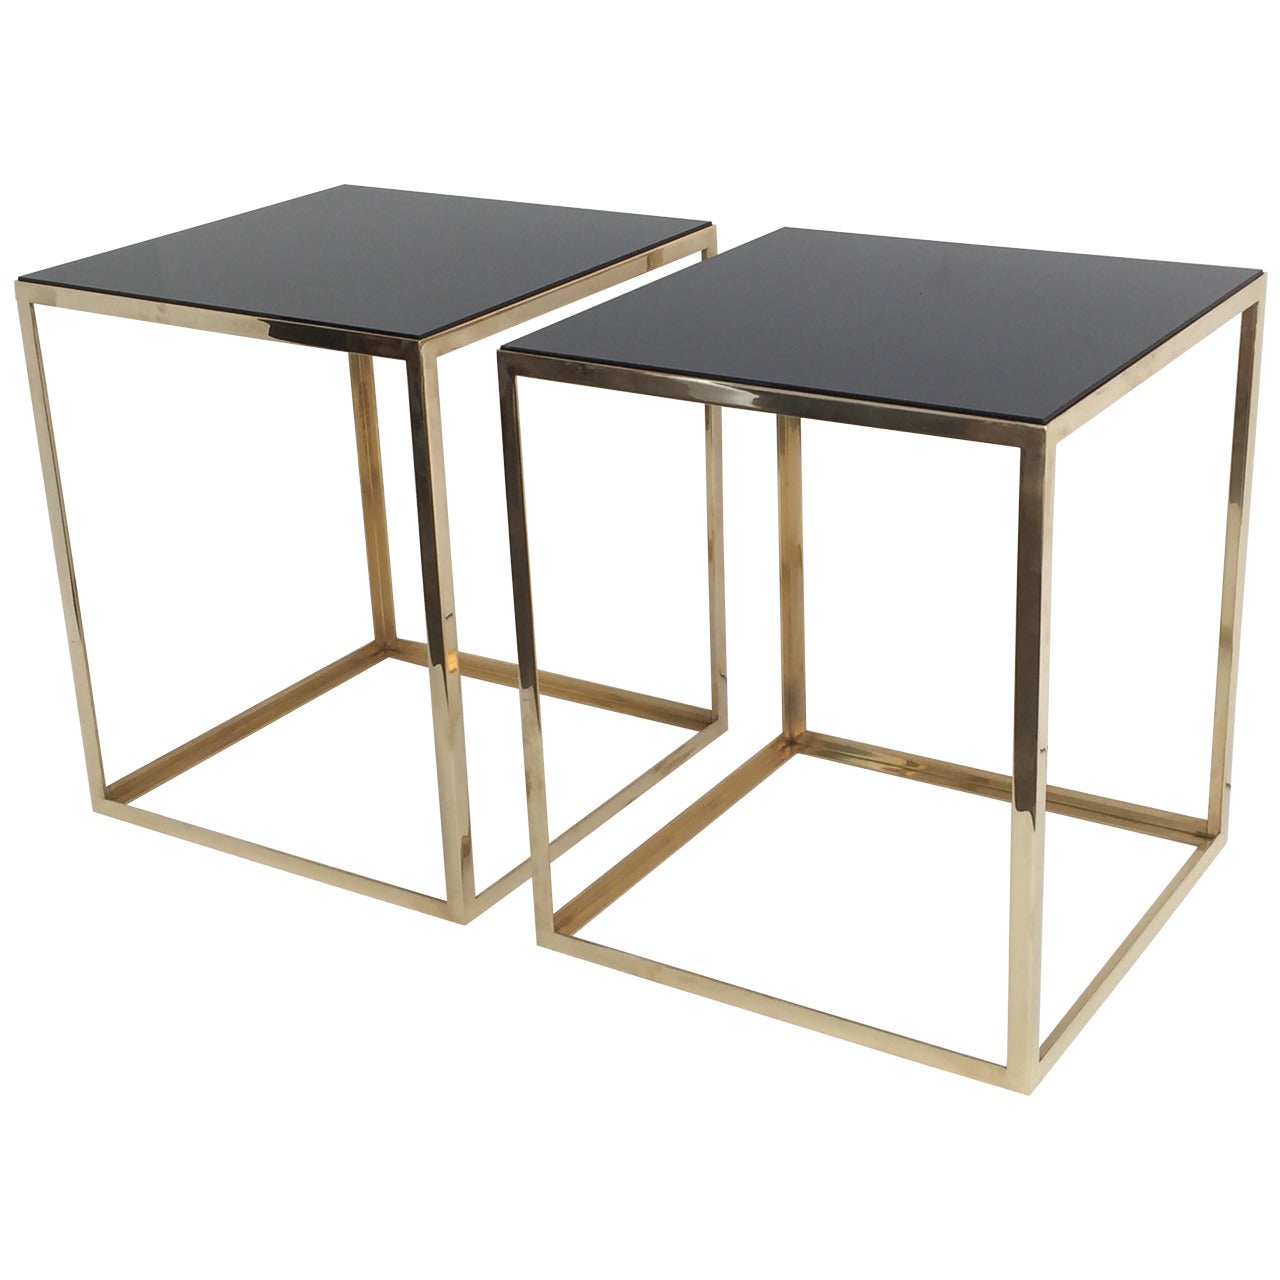 Pair of Brass and Black Glass Cube Tables